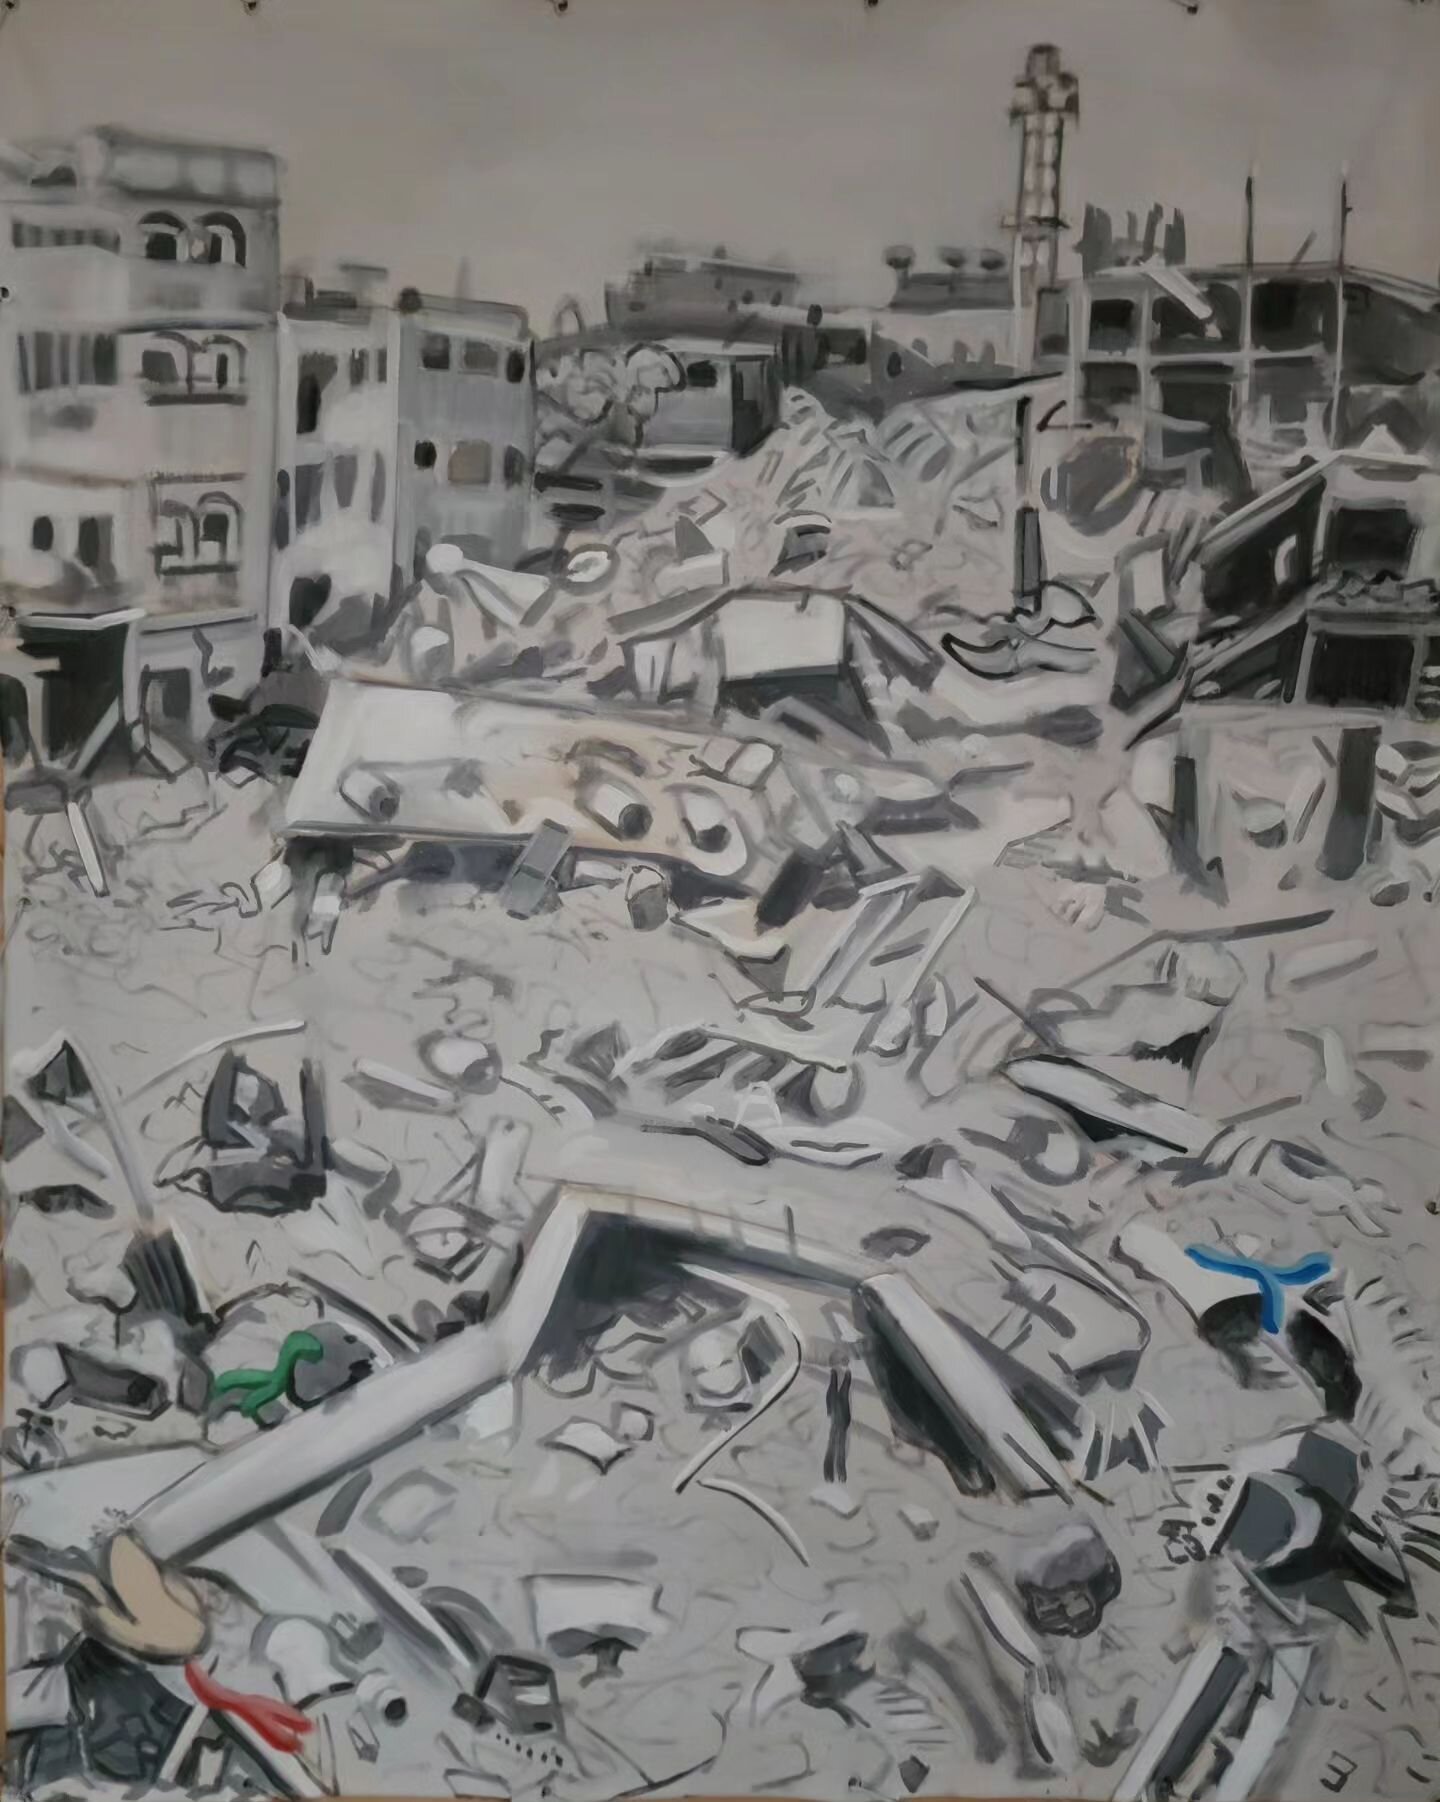 Here are the last two in my &quot;History of the Jews&quot; series: &quot;Rubble&quot; and &quot;Intifada.&quot; For some reason, IG wouldn't let me put the other four paintings in this post, but you can see them in earlier posts, including: &quot;Zi